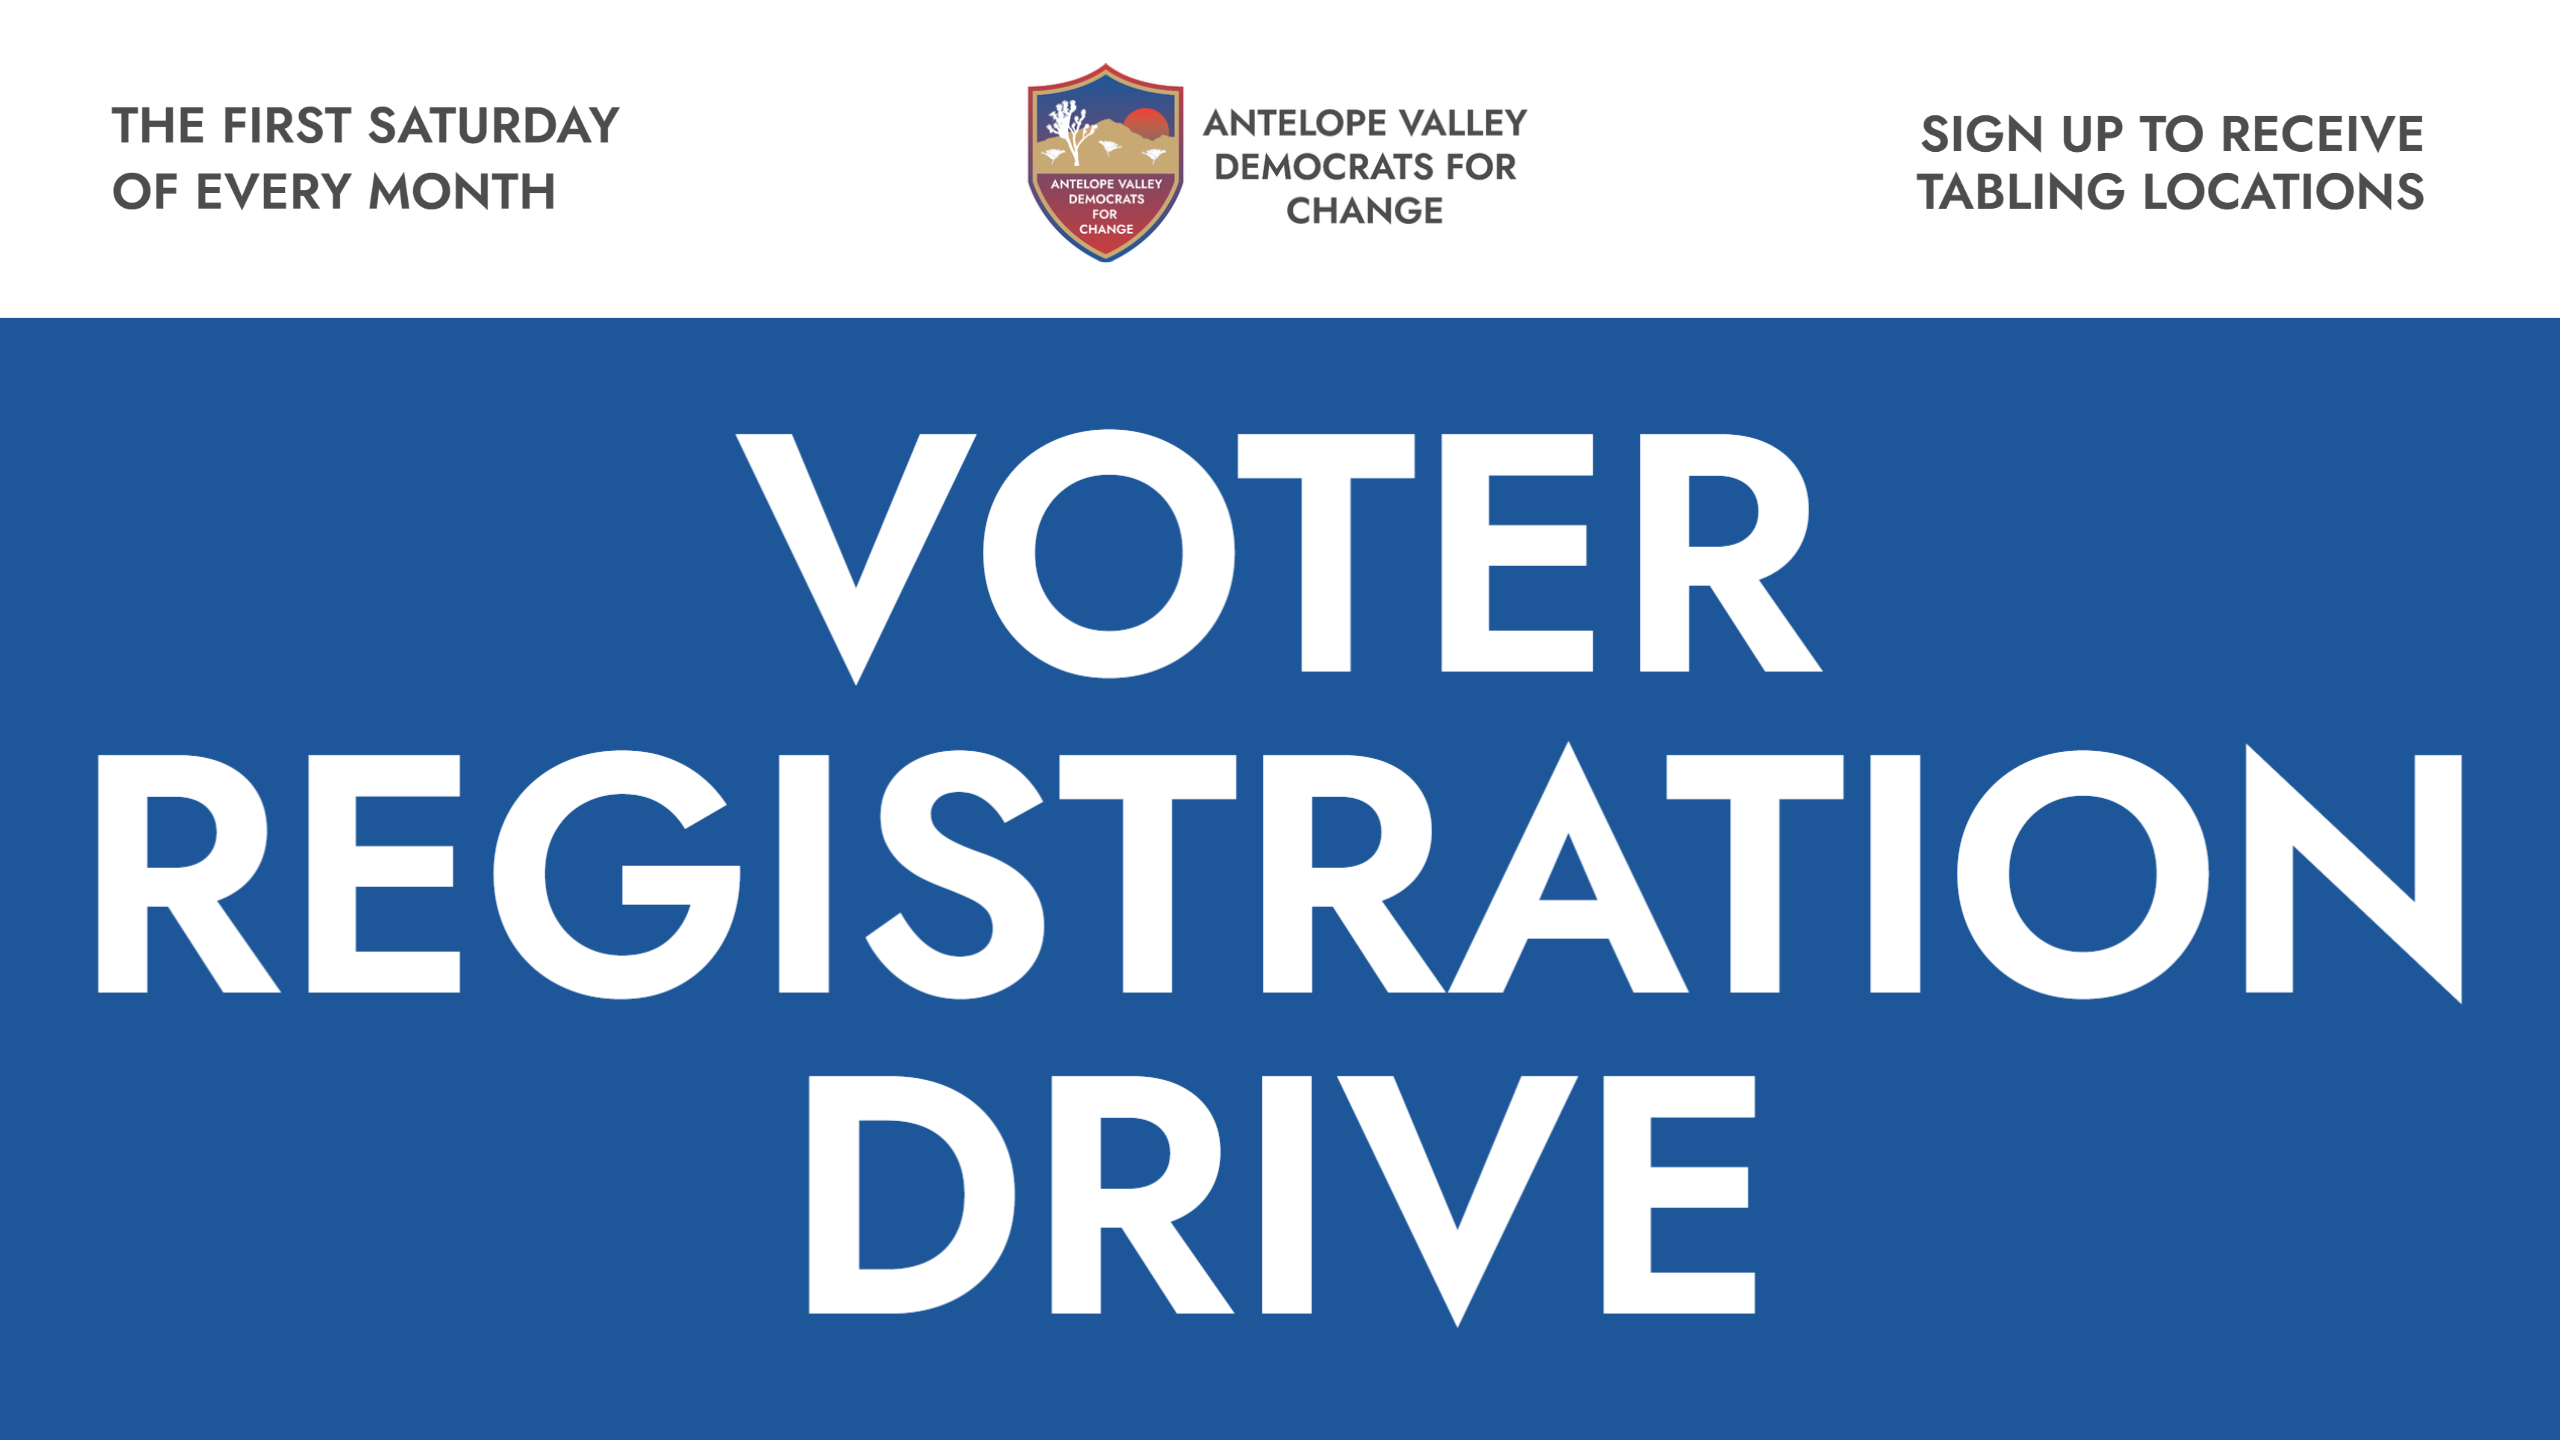 Antelope Valley Democrats for Change: Monthly Voter Registration Drive 📋